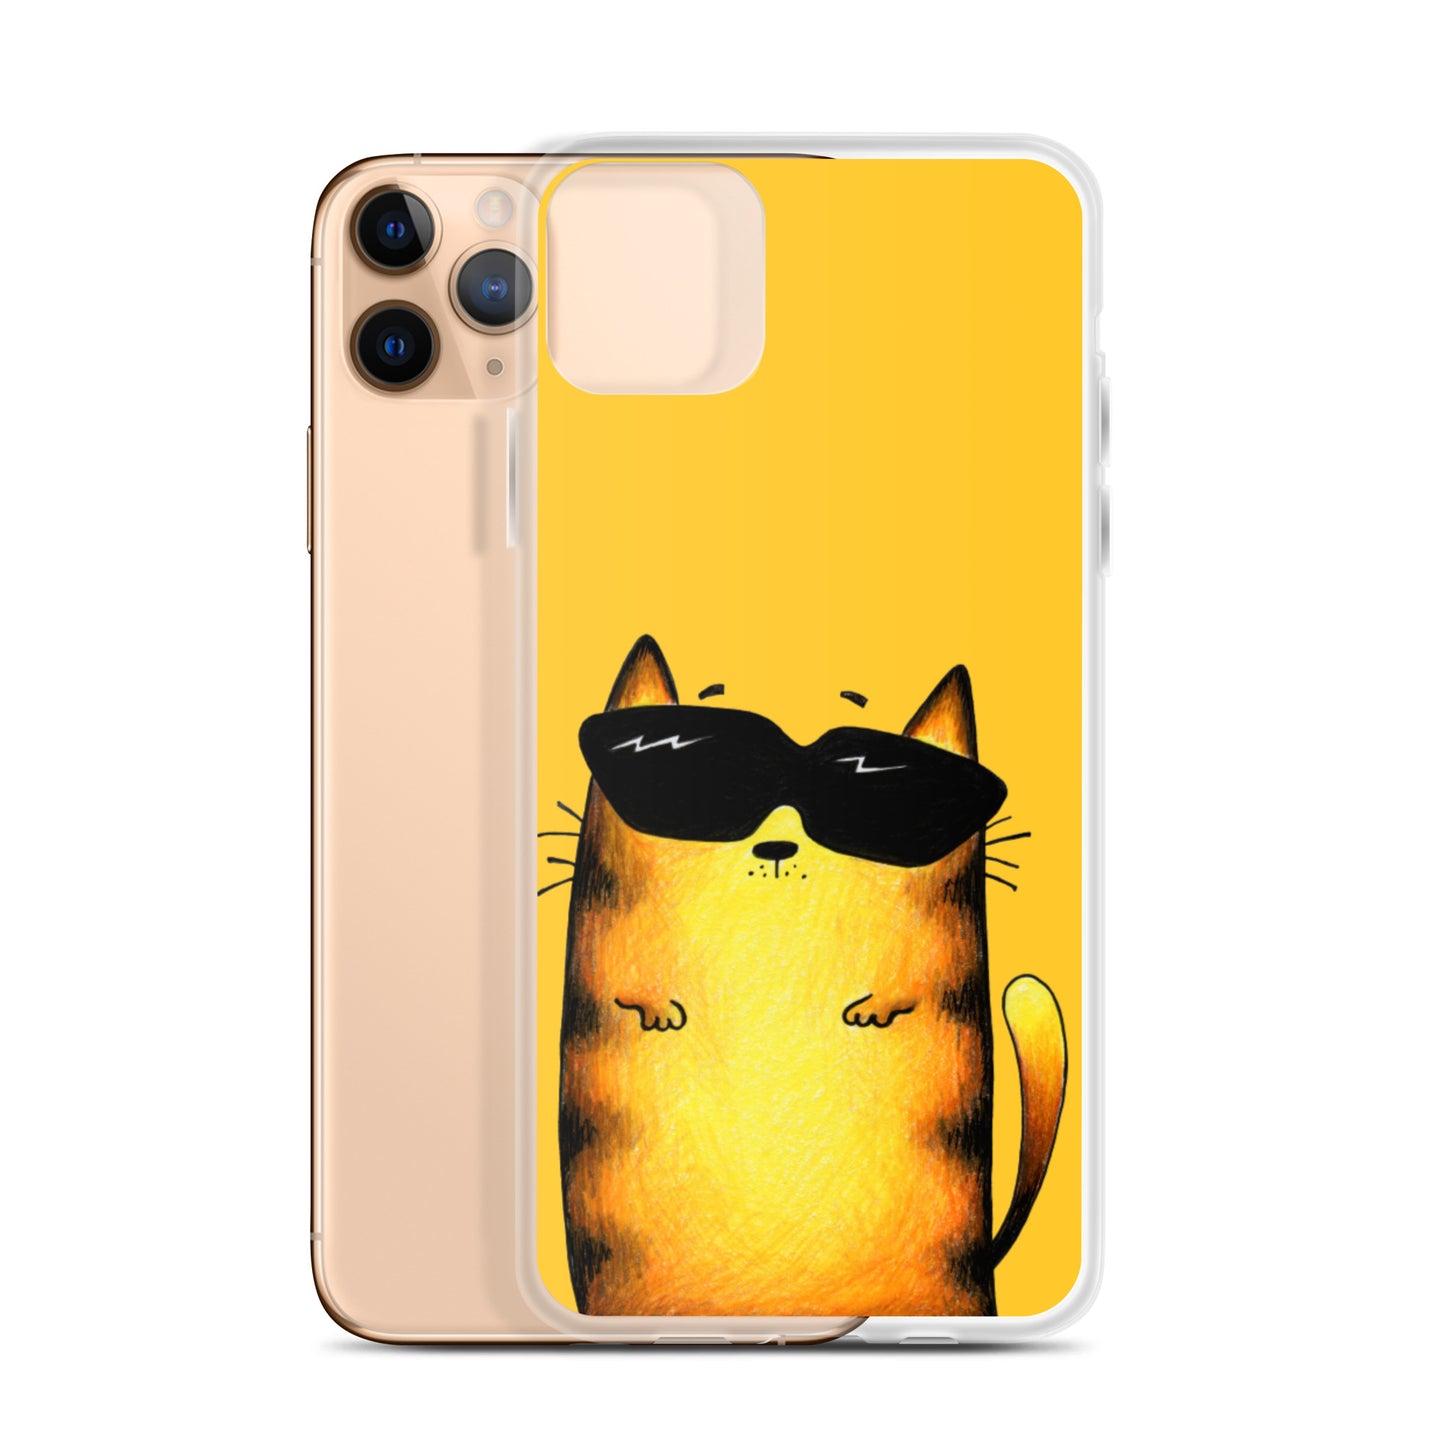 flexible yellow iphone 11 pro max case with cat print